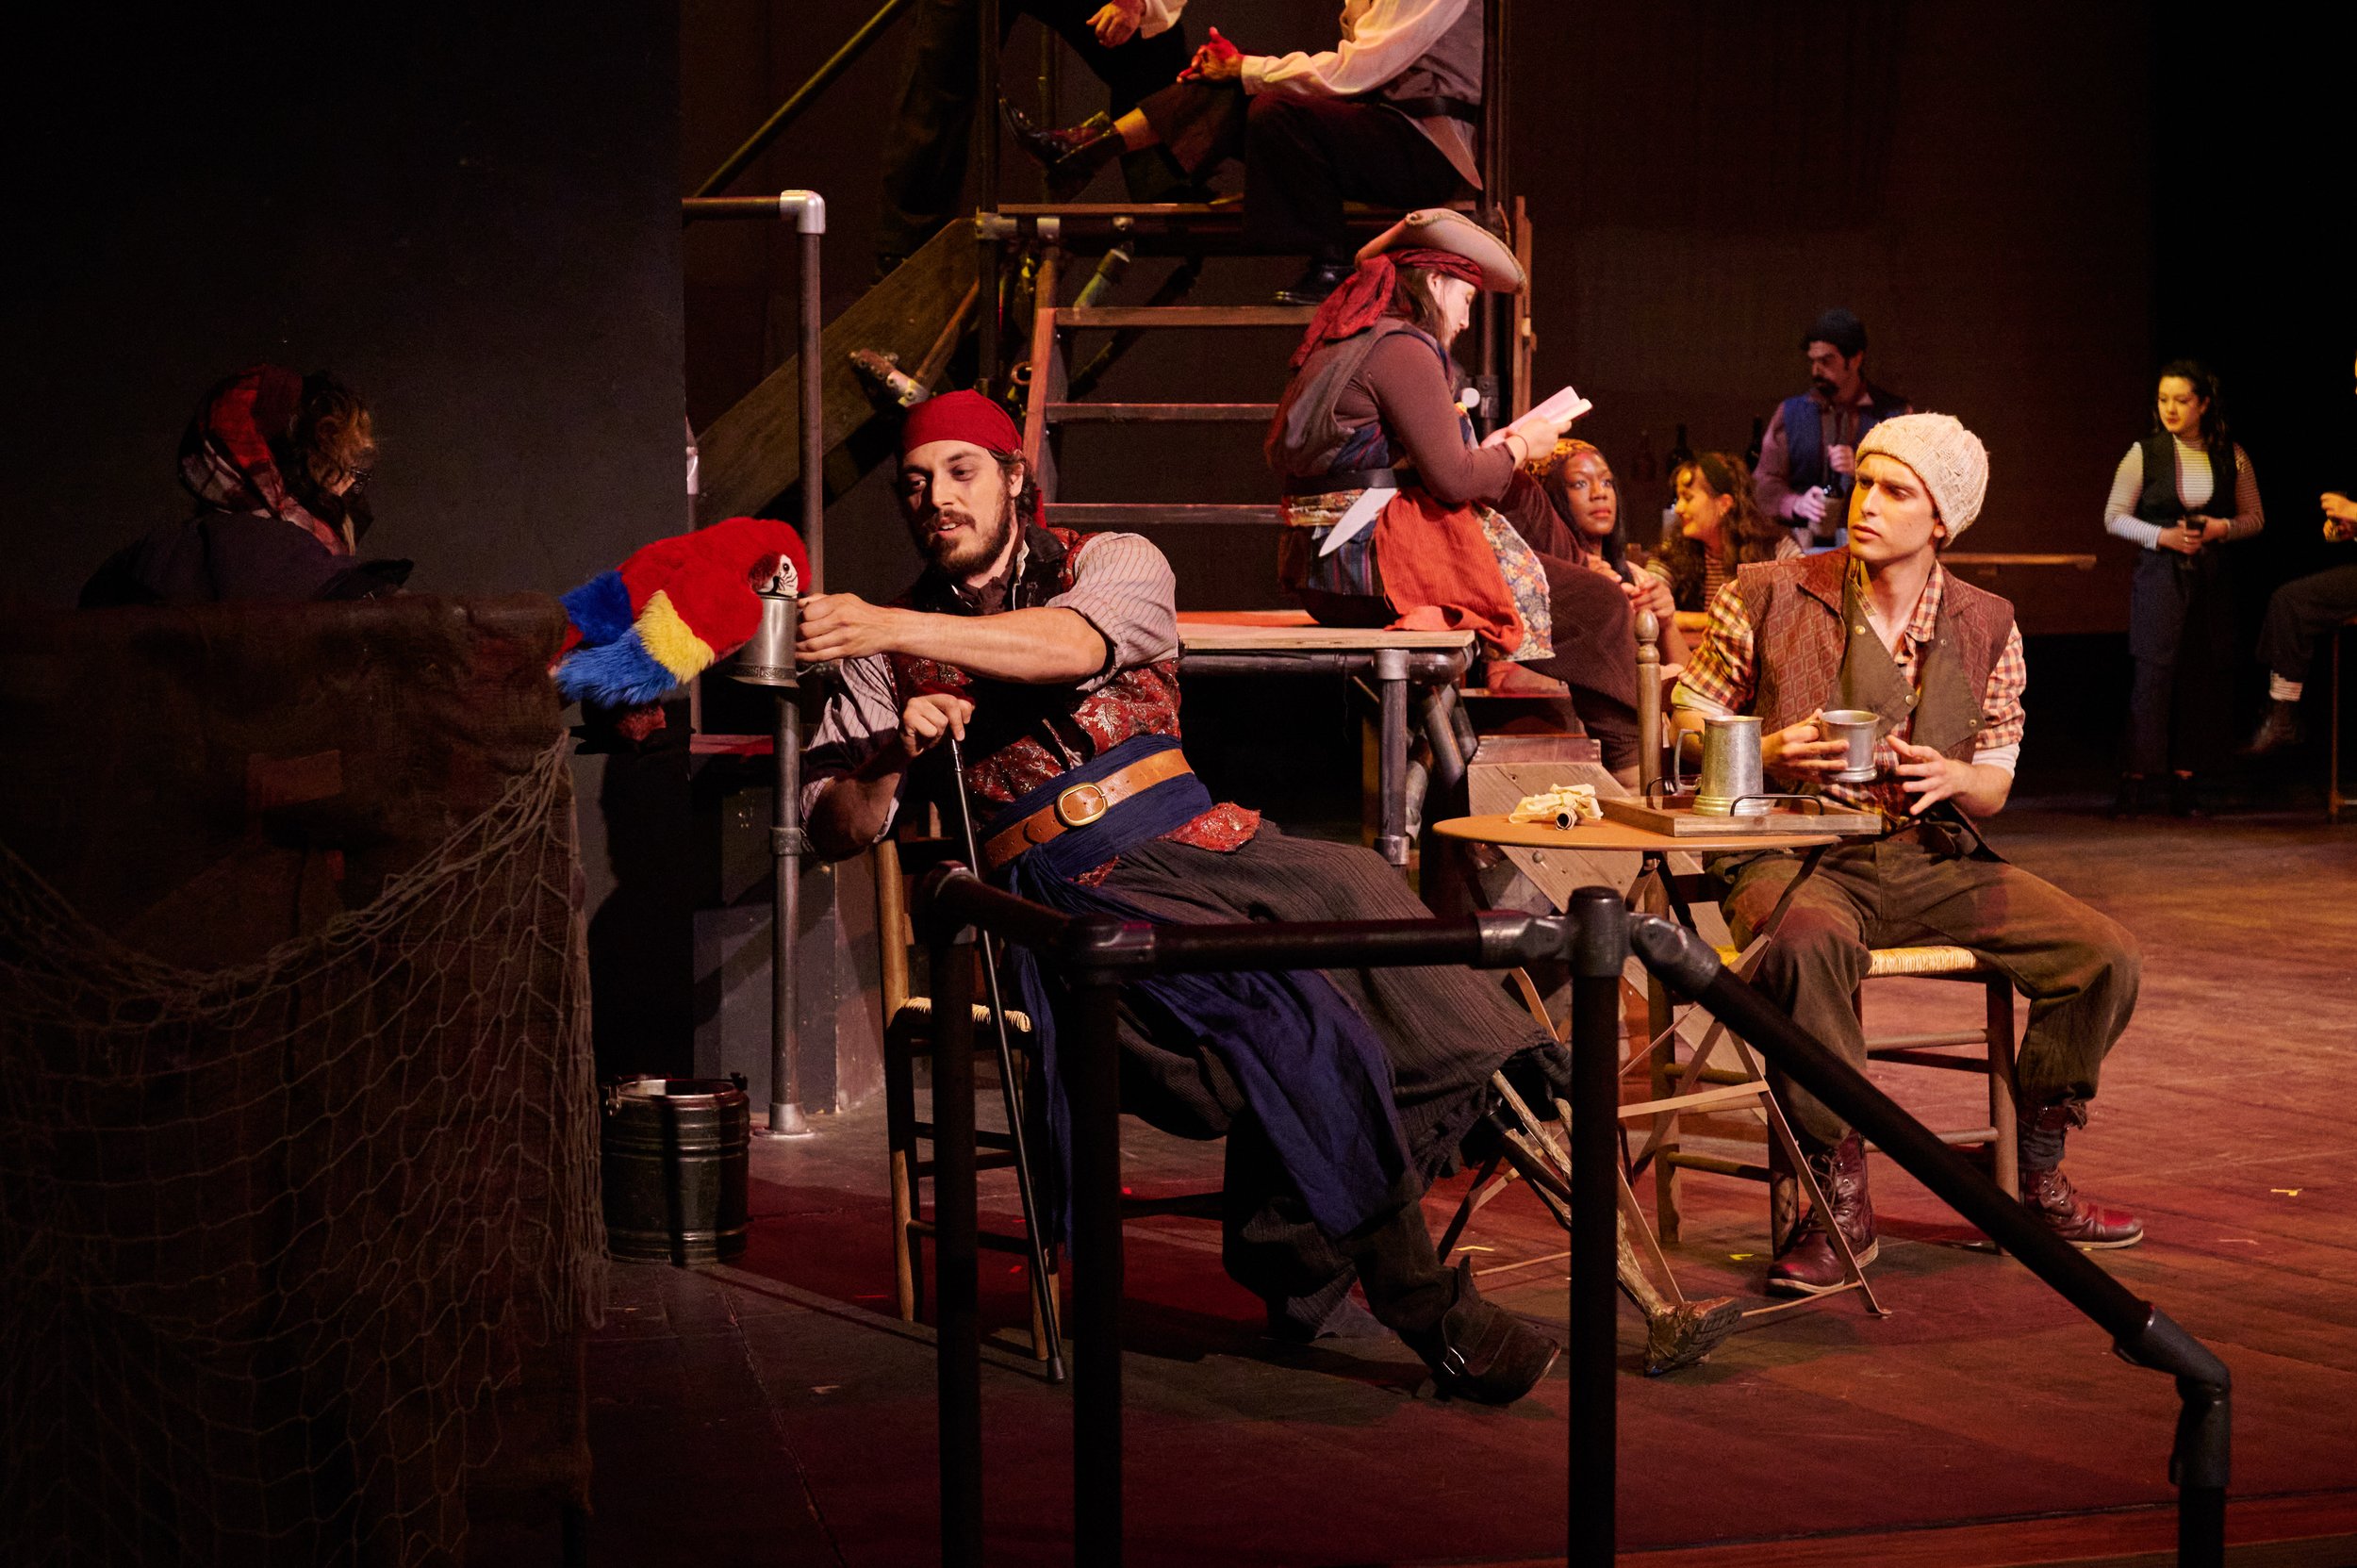  Rachel Dwight-Alvarez, Ryan Dylan Wargnier, Ryan Del Papa, and cast during a performance of the Santa Monica College Theatre Arts production of "Treasure Island" at the SMC Main Stage on Sunday, May 22, 2022, in Santa Monica, Calif. (Nicholas McCall